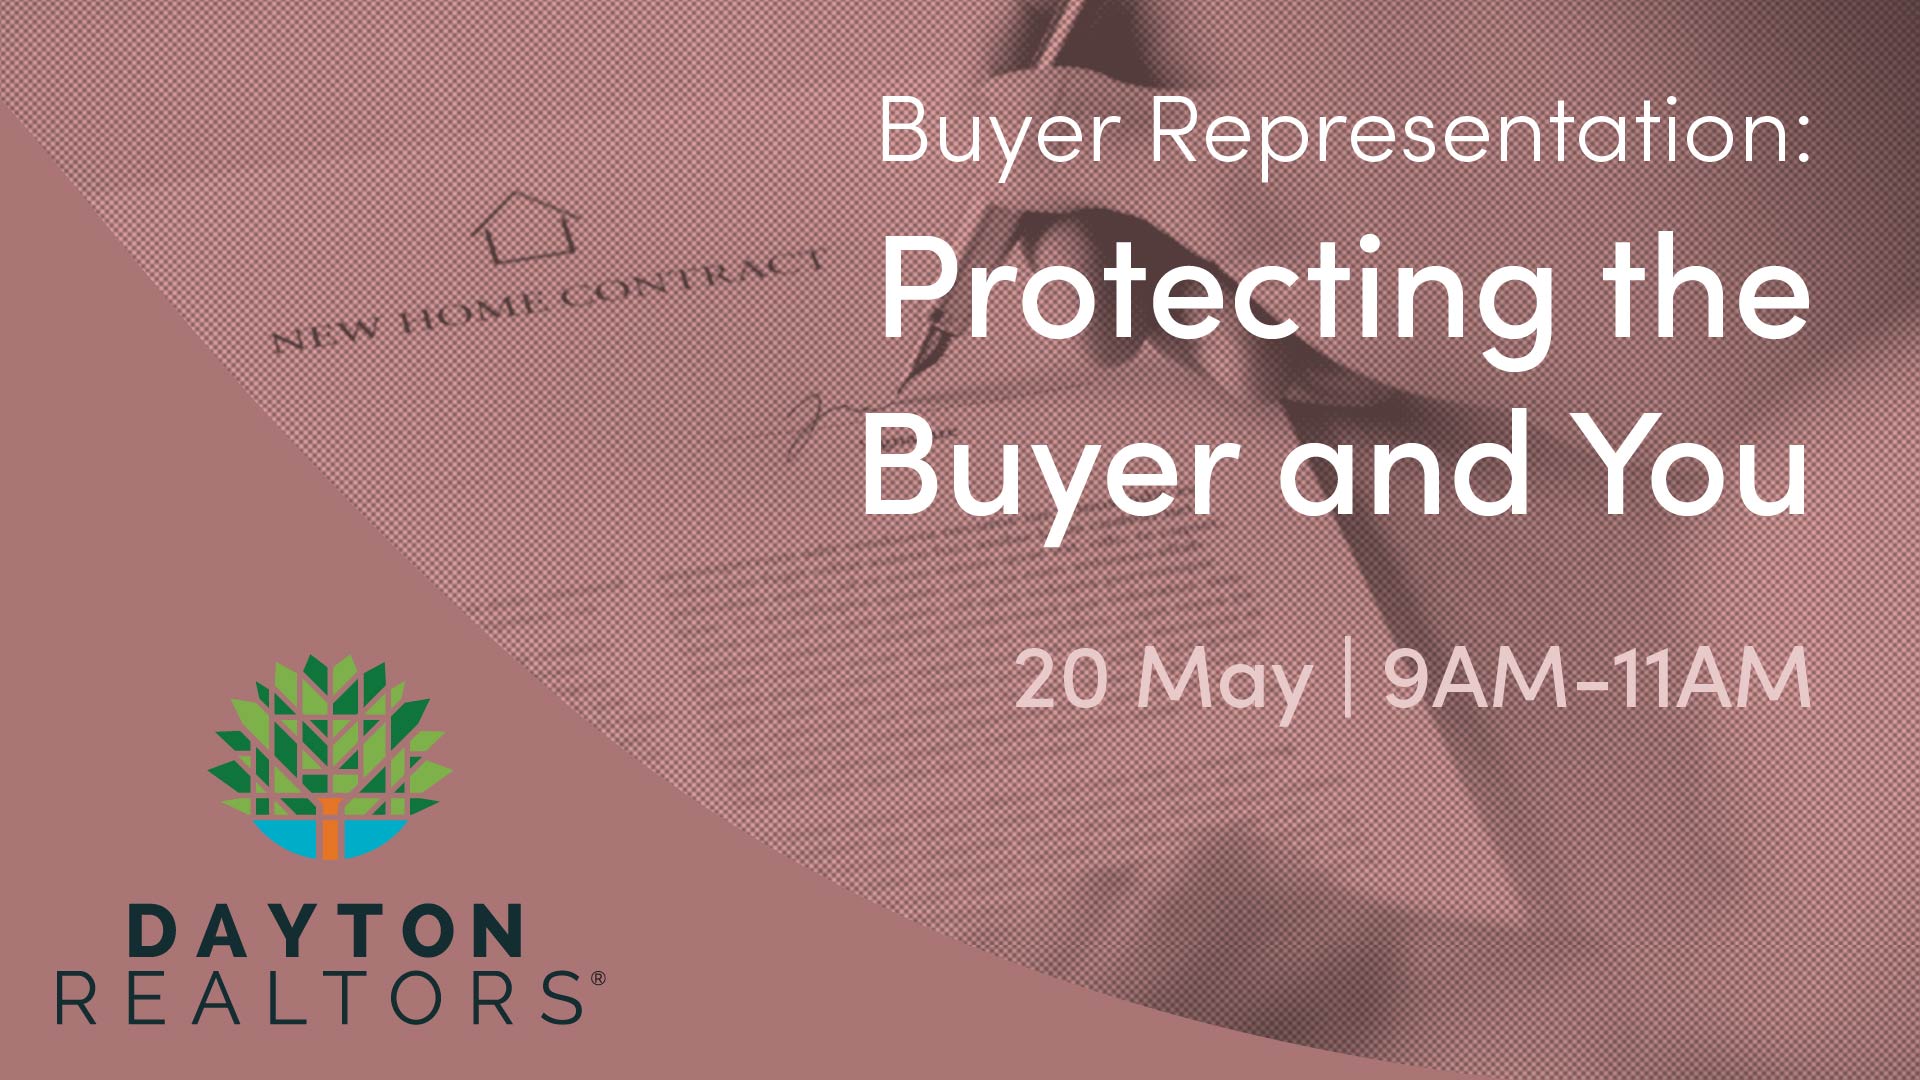 Buyer Representation: Protecting the Buyer and You